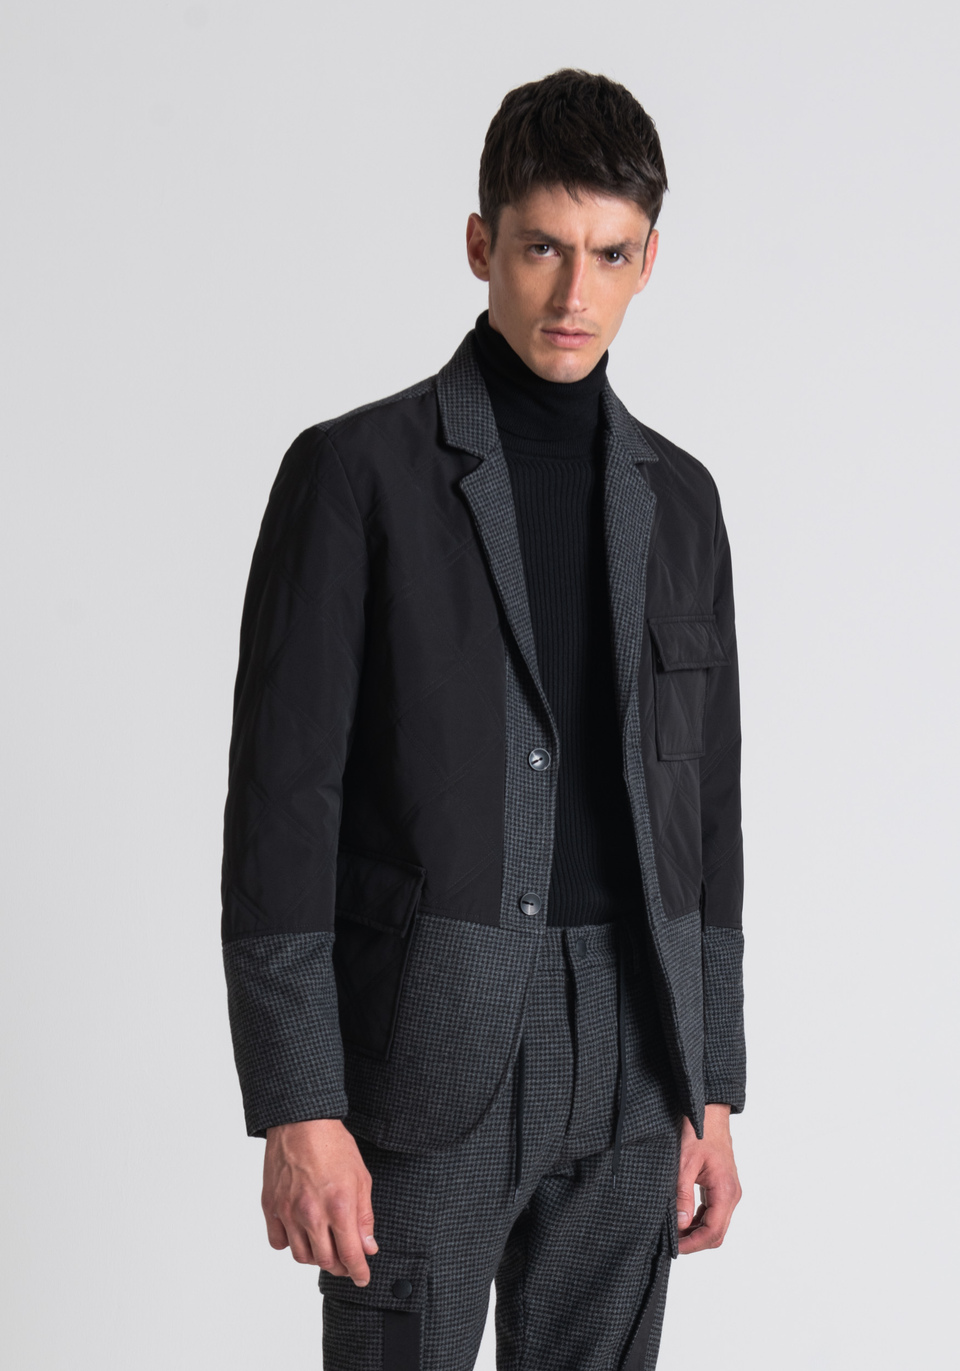 "DIANA" REGULAR FIT JACKET WITH WOOL PATCH - Antony Morato Online Shop